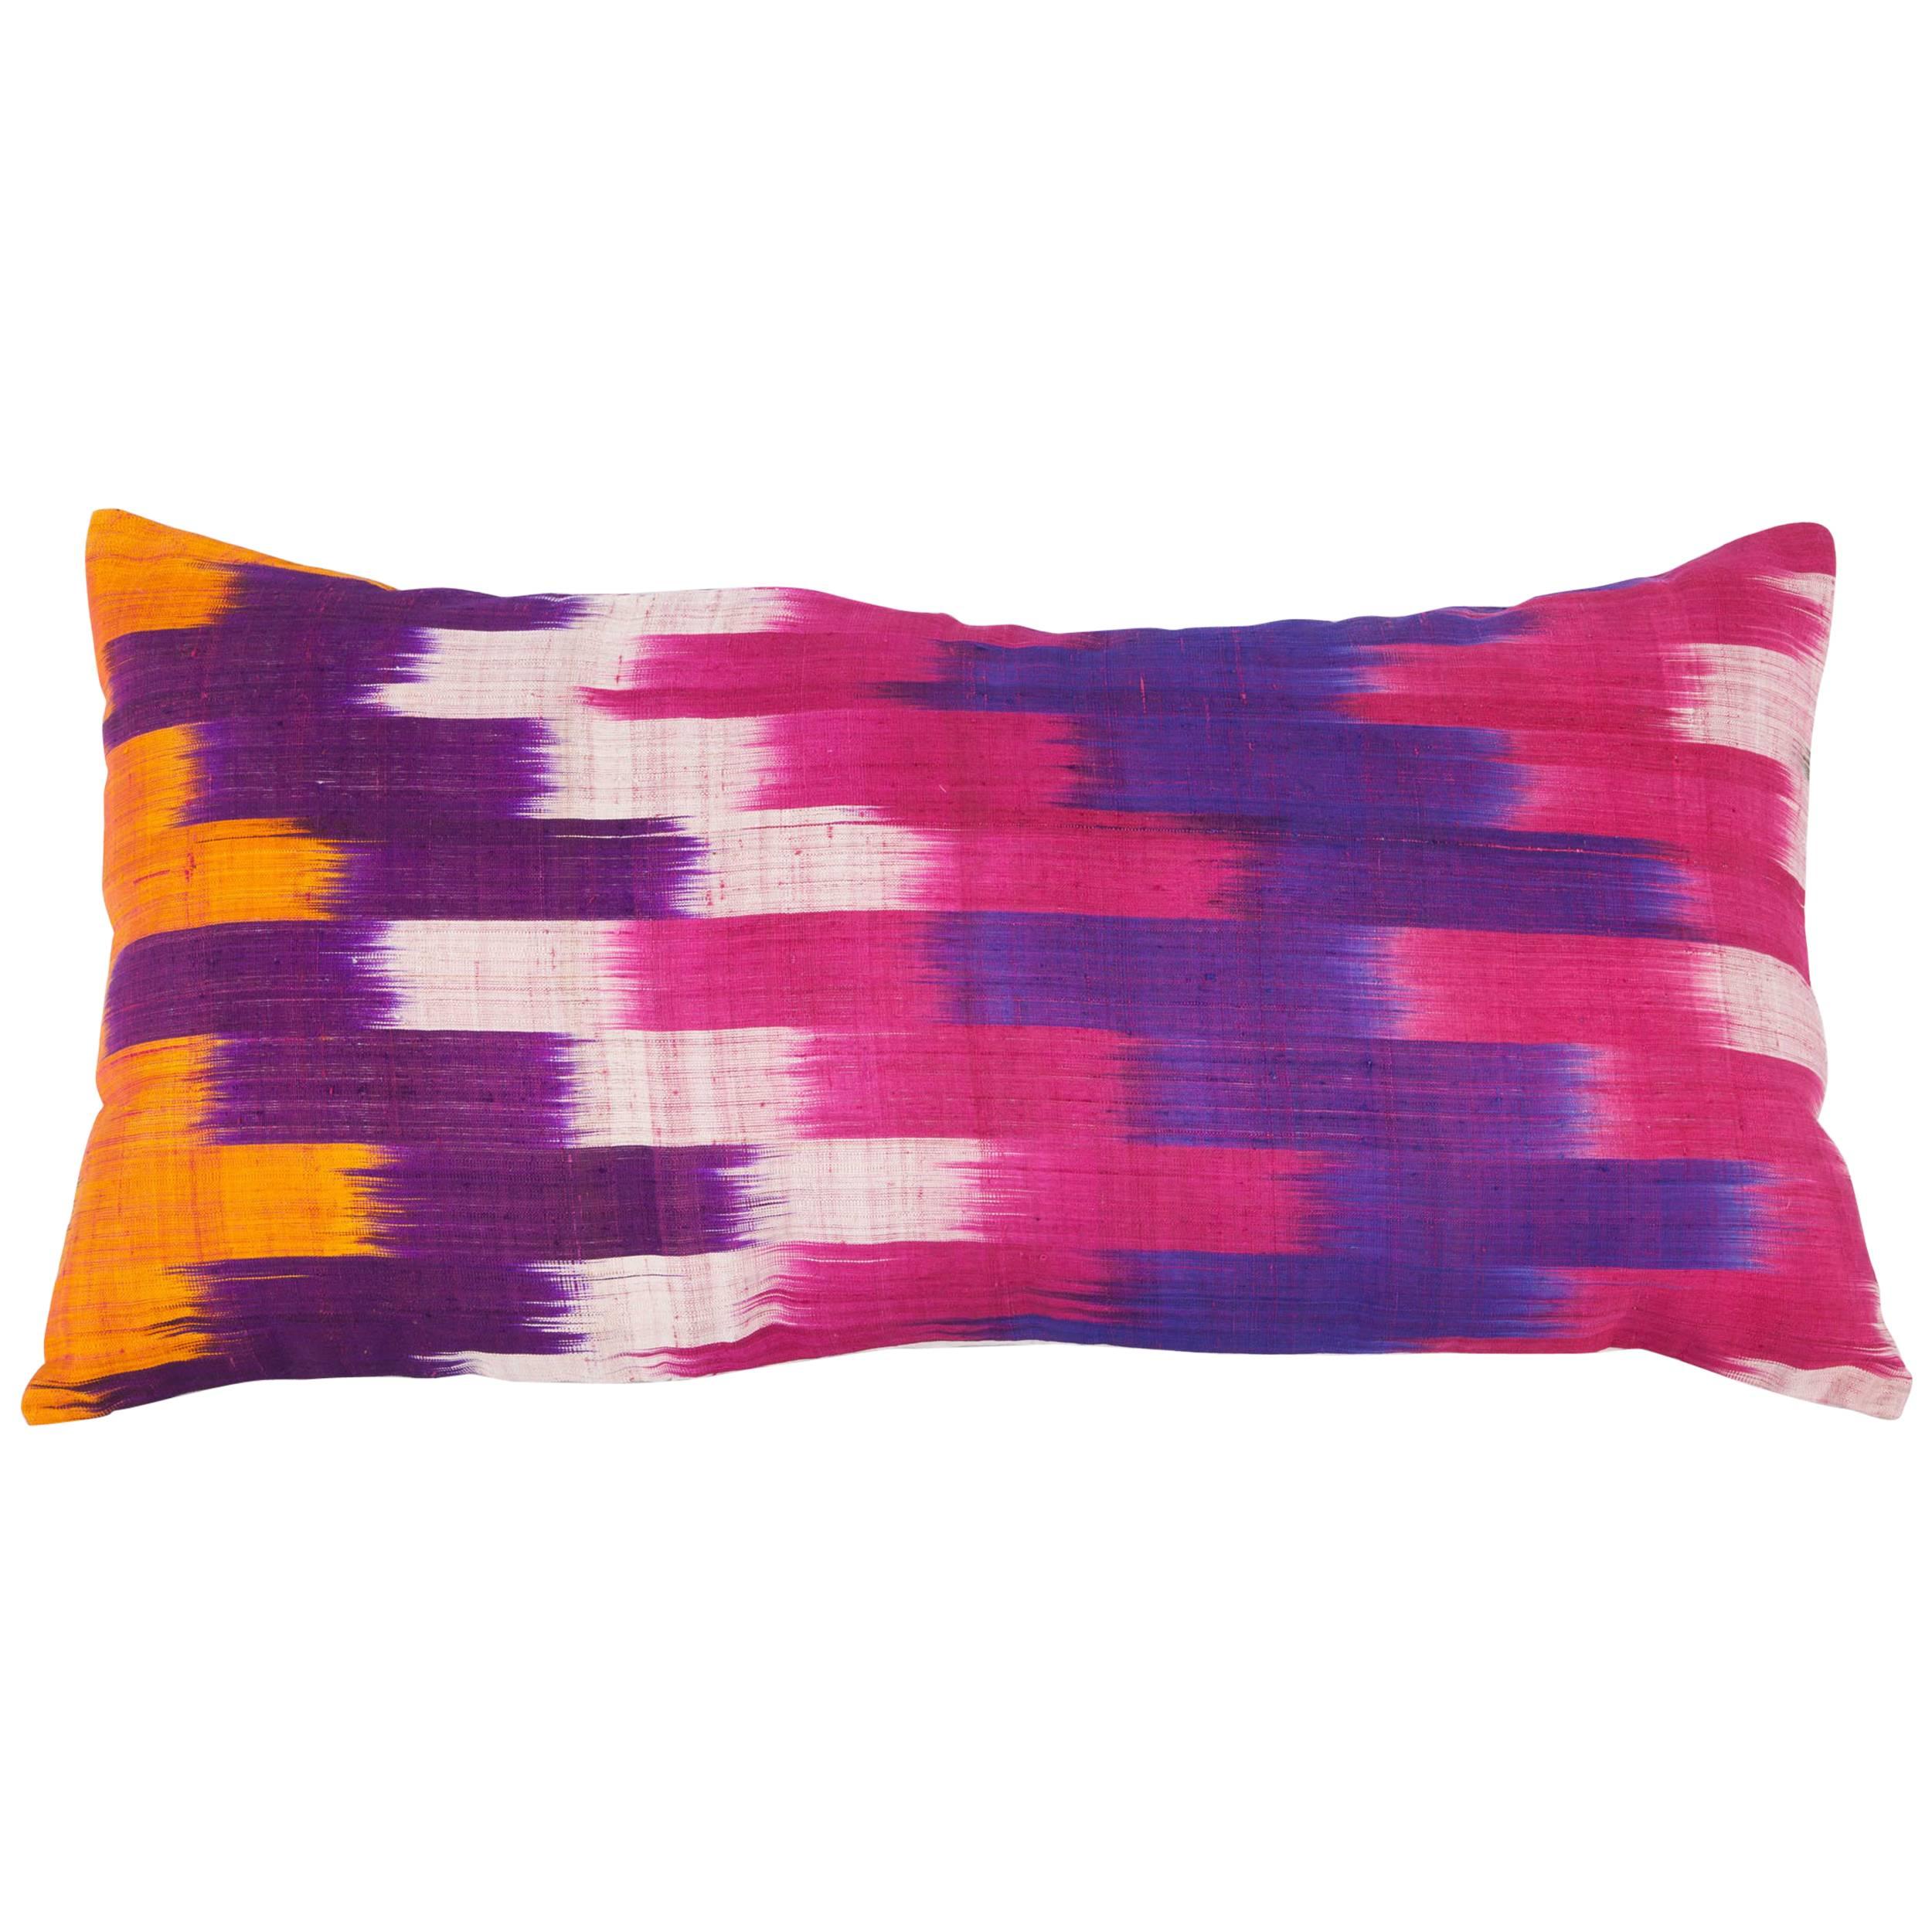 Early 20th Century Ikat Pillow